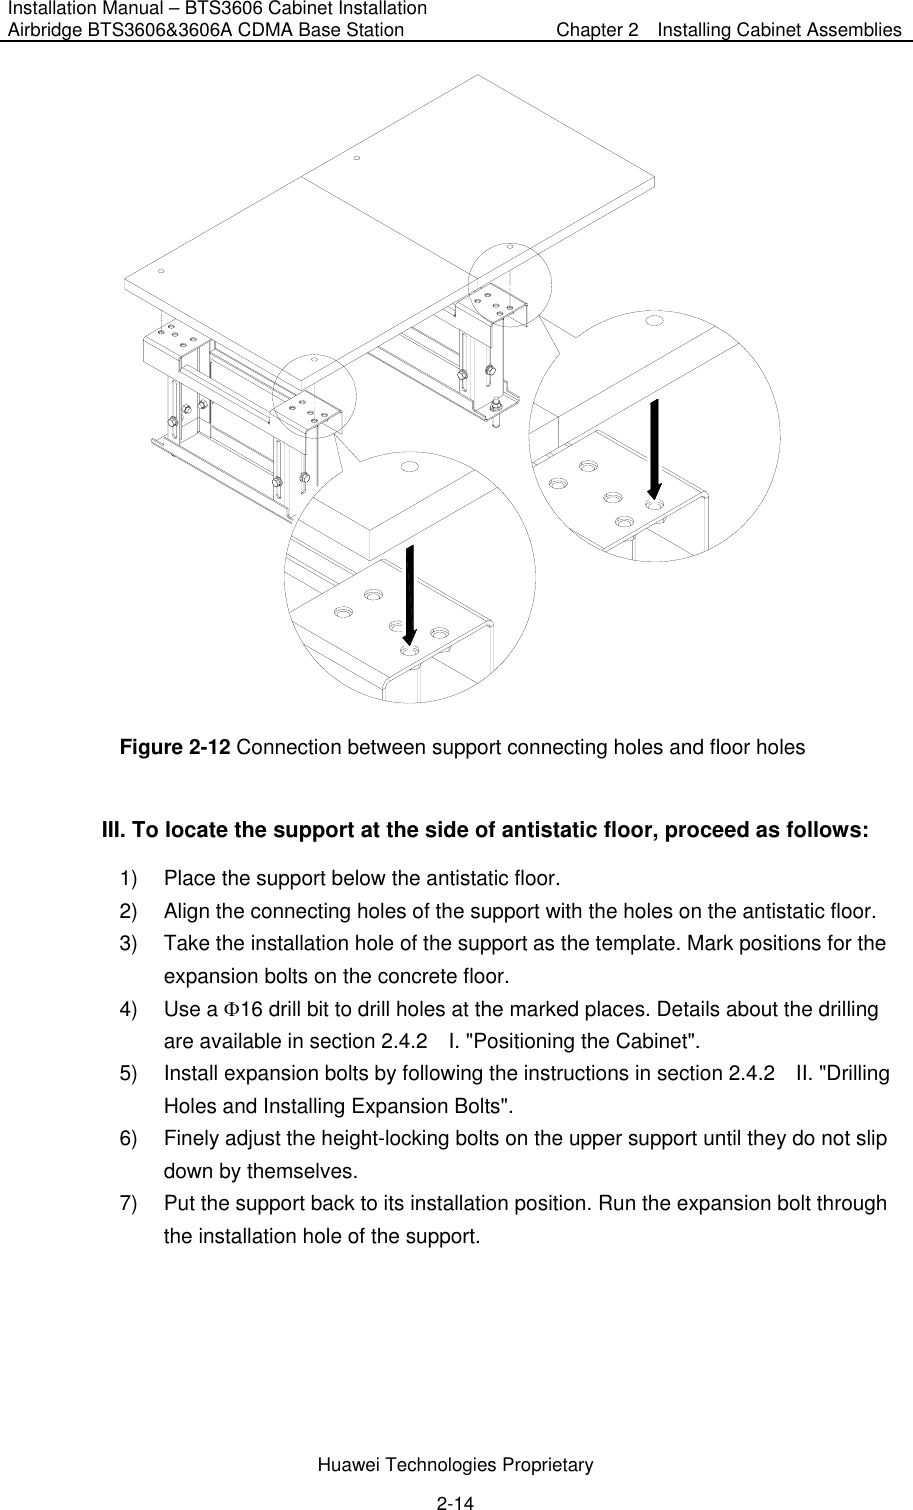 Installation Manual – BTS3606 Cabinet Installation Airbridge BTS3606&amp;3606A CDMA Base Station  Chapter 2    Installing Cabinet Assemblies  Huawei Technologies Proprietary 2-14  Figure 2-12 Connection between support connecting holes and floor holes III. To locate the support at the side of antistatic floor, proceed as follows:   1)  Place the support below the antistatic floor. 2)  Align the connecting holes of the support with the holes on the antistatic floor. 3)  Take the installation hole of the support as the template. Mark positions for the expansion bolts on the concrete floor. 4) Use a Φ16 drill bit to drill holes at the marked places. Details about the drilling are available in section 2.4.2    I. &quot;Positioning the Cabinet&quot;. 5)  Install expansion bolts by following the instructions in section 2.4.2  II. &quot;Drilling Holes and Installing Expansion Bolts&quot;. 6)  Finely adjust the height-locking bolts on the upper support until they do not slip down by themselves. 7)  Put the support back to its installation position. Run the expansion bolt through the installation hole of the support. 